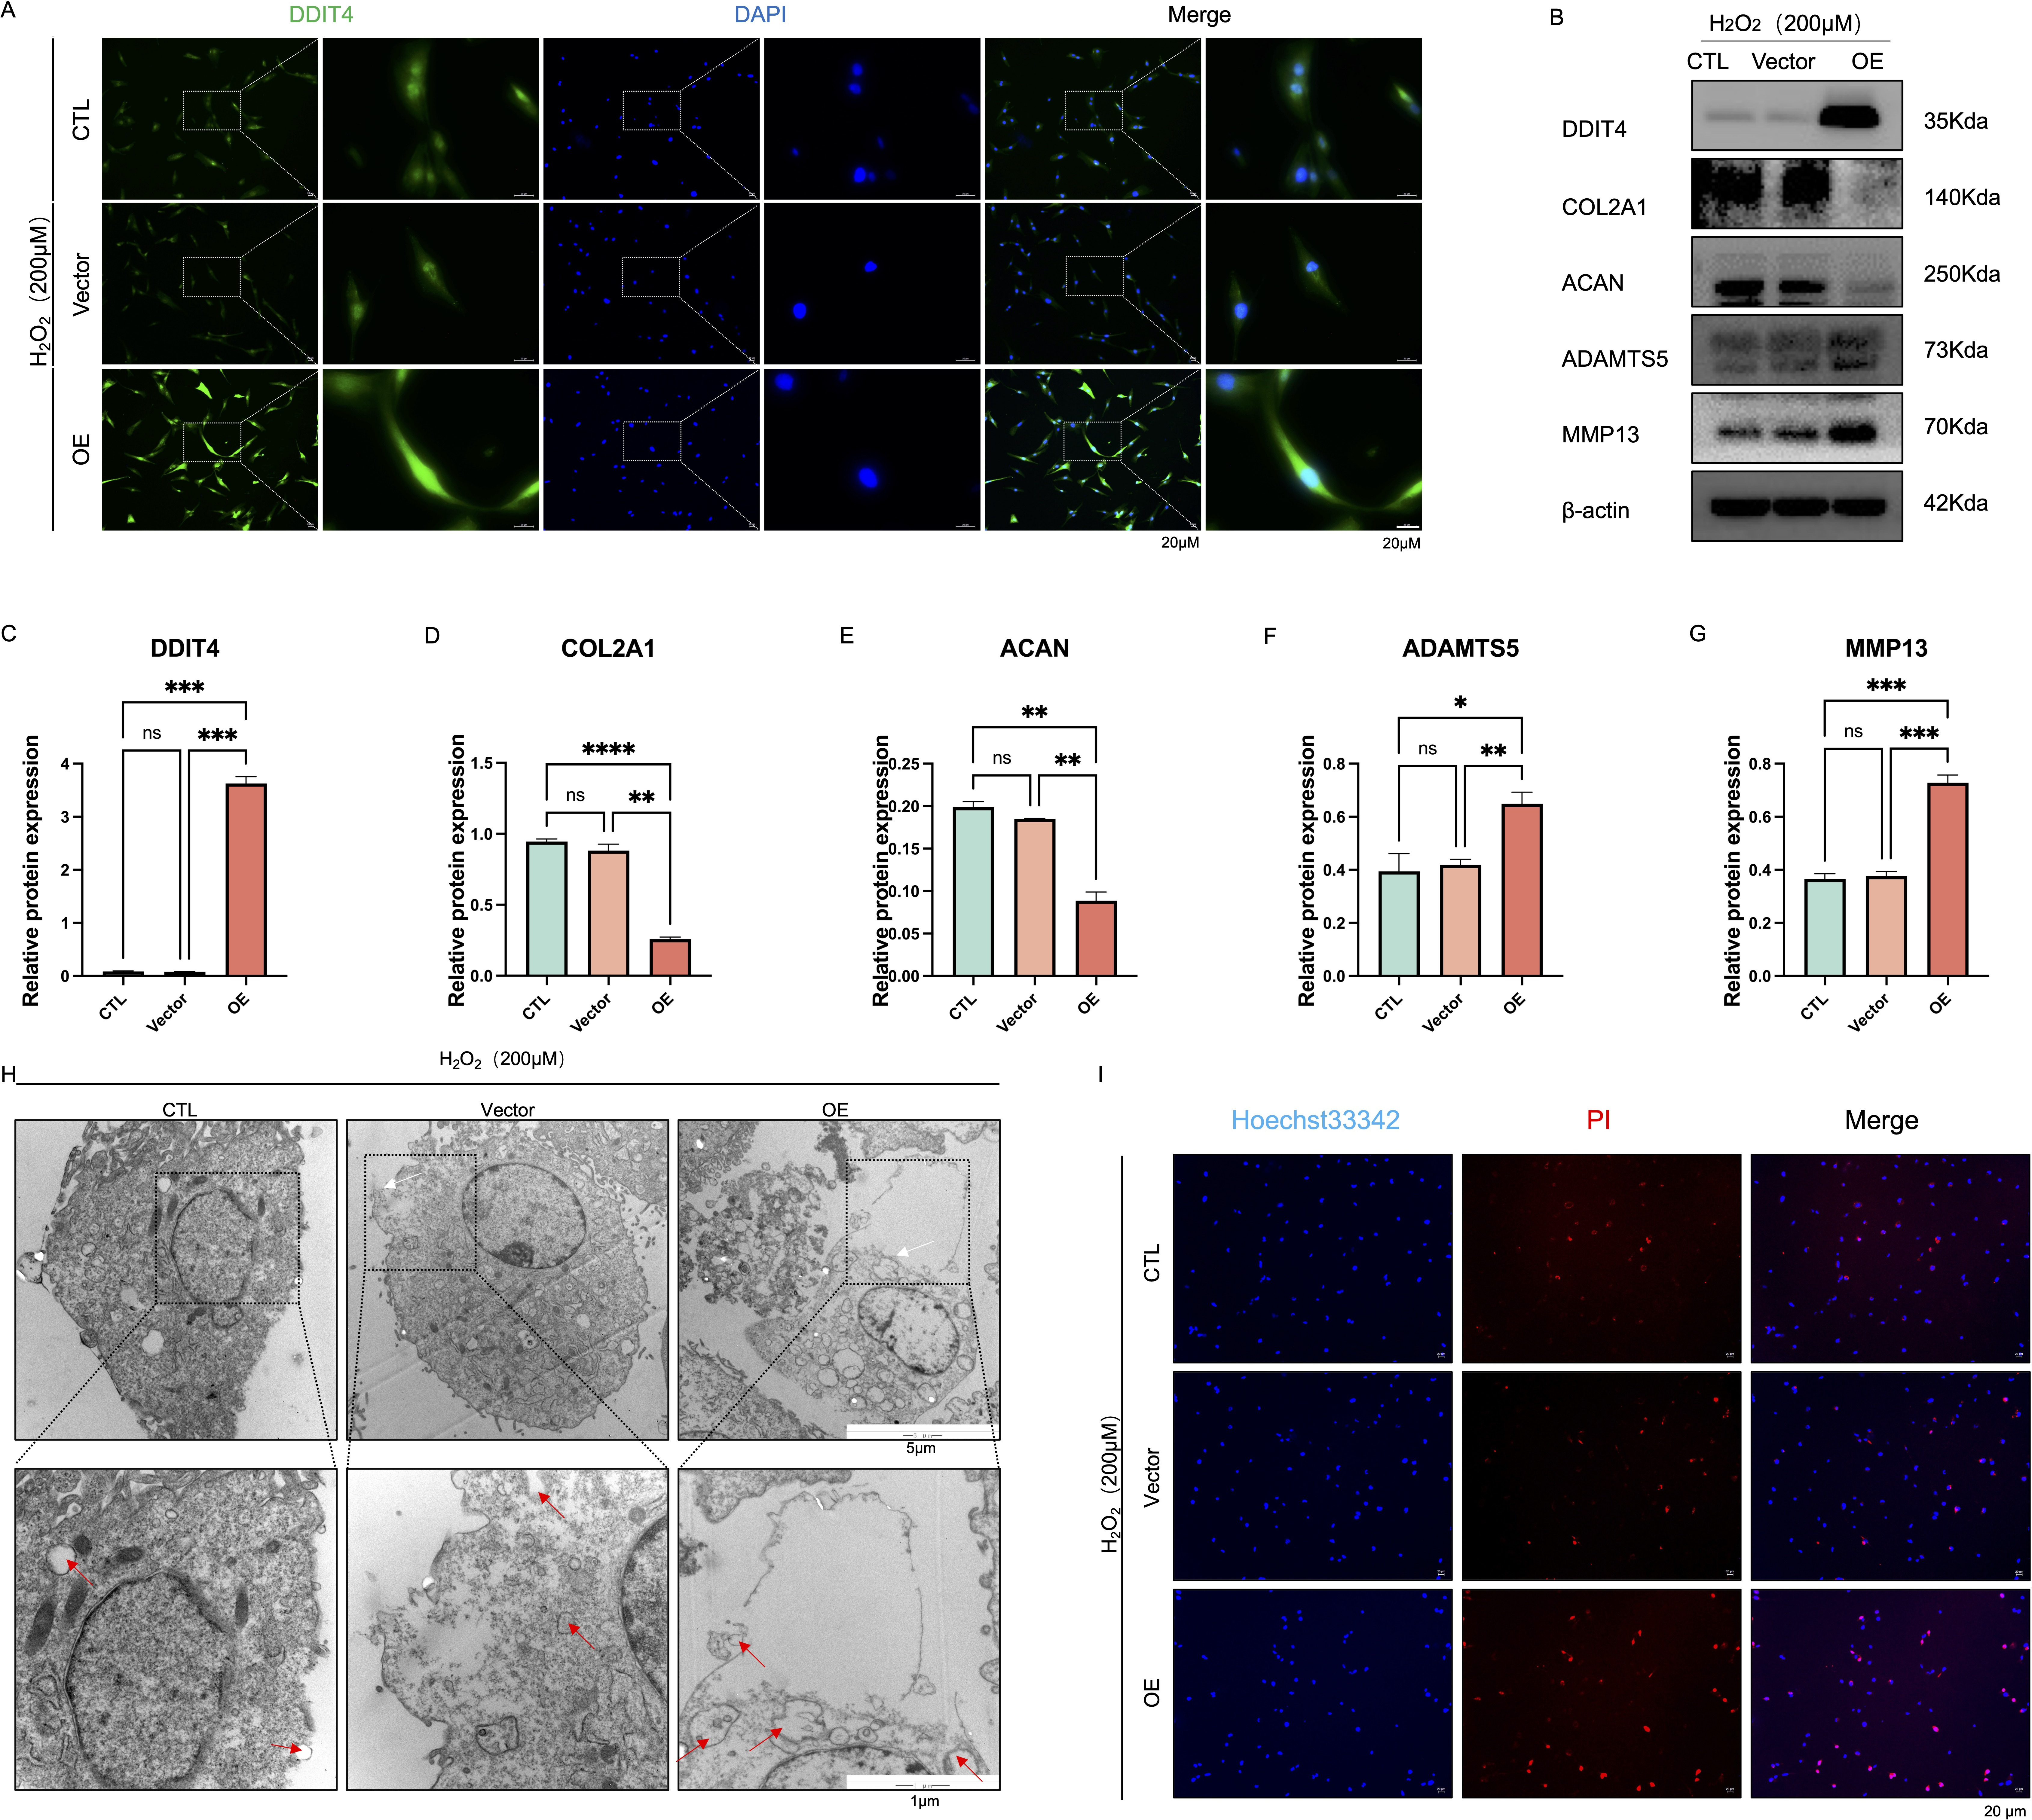 Fig. 3 
            Upregulation of DDIT4 aggravates pyroptosis of nucleus pulposus cells (NPCs) under oxidative stress. DDIT4 was overexpressed in NPCs, and NPCs were treated with 200 μM hydrogen peroxide for 24 hours. a) Immunofluorescence analysis of DDIT4 after hydrogen peroxide treatment in the control, vector, and overexpression groups; scale bars, 20 μm. b) to g) Representative images of western blotting and quantitative analysis of DDIT4, COL2A1, ACAN, ADAMTS5, and matrix metalloproteinase 13 (MMP13) in the control, vector, and overexpression groups after hydrogen peroxide treatment. h) Transmission electron microscope images of NPCs treated with hydrogen peroxide in the control, vector, and overexpression groups, such as cytoplasmic oedema, swelling of cell membrane, karyopyknosis, and organelle cavitation; white arrows show swelling of cell membran, while red arrows show organelle cavitation. Scale bars in overall view: 5 μm; scale bars in local view: 1 μm. i) Representative fluorescence images of Hoechst 33342/PI staining of NPCs treated with hydrogen peroxide in the control, vector, and overexpression groups. Scale bars, 20 μm. Data are expressed as the mean and standard deviation of at least three independent experiments. Two-way analysis of variance was used for statistical analysis (ns, no statistical significance; *p < 0.05; **p < 0.01; ***p < 0.001; ****p < 0.0001).
          